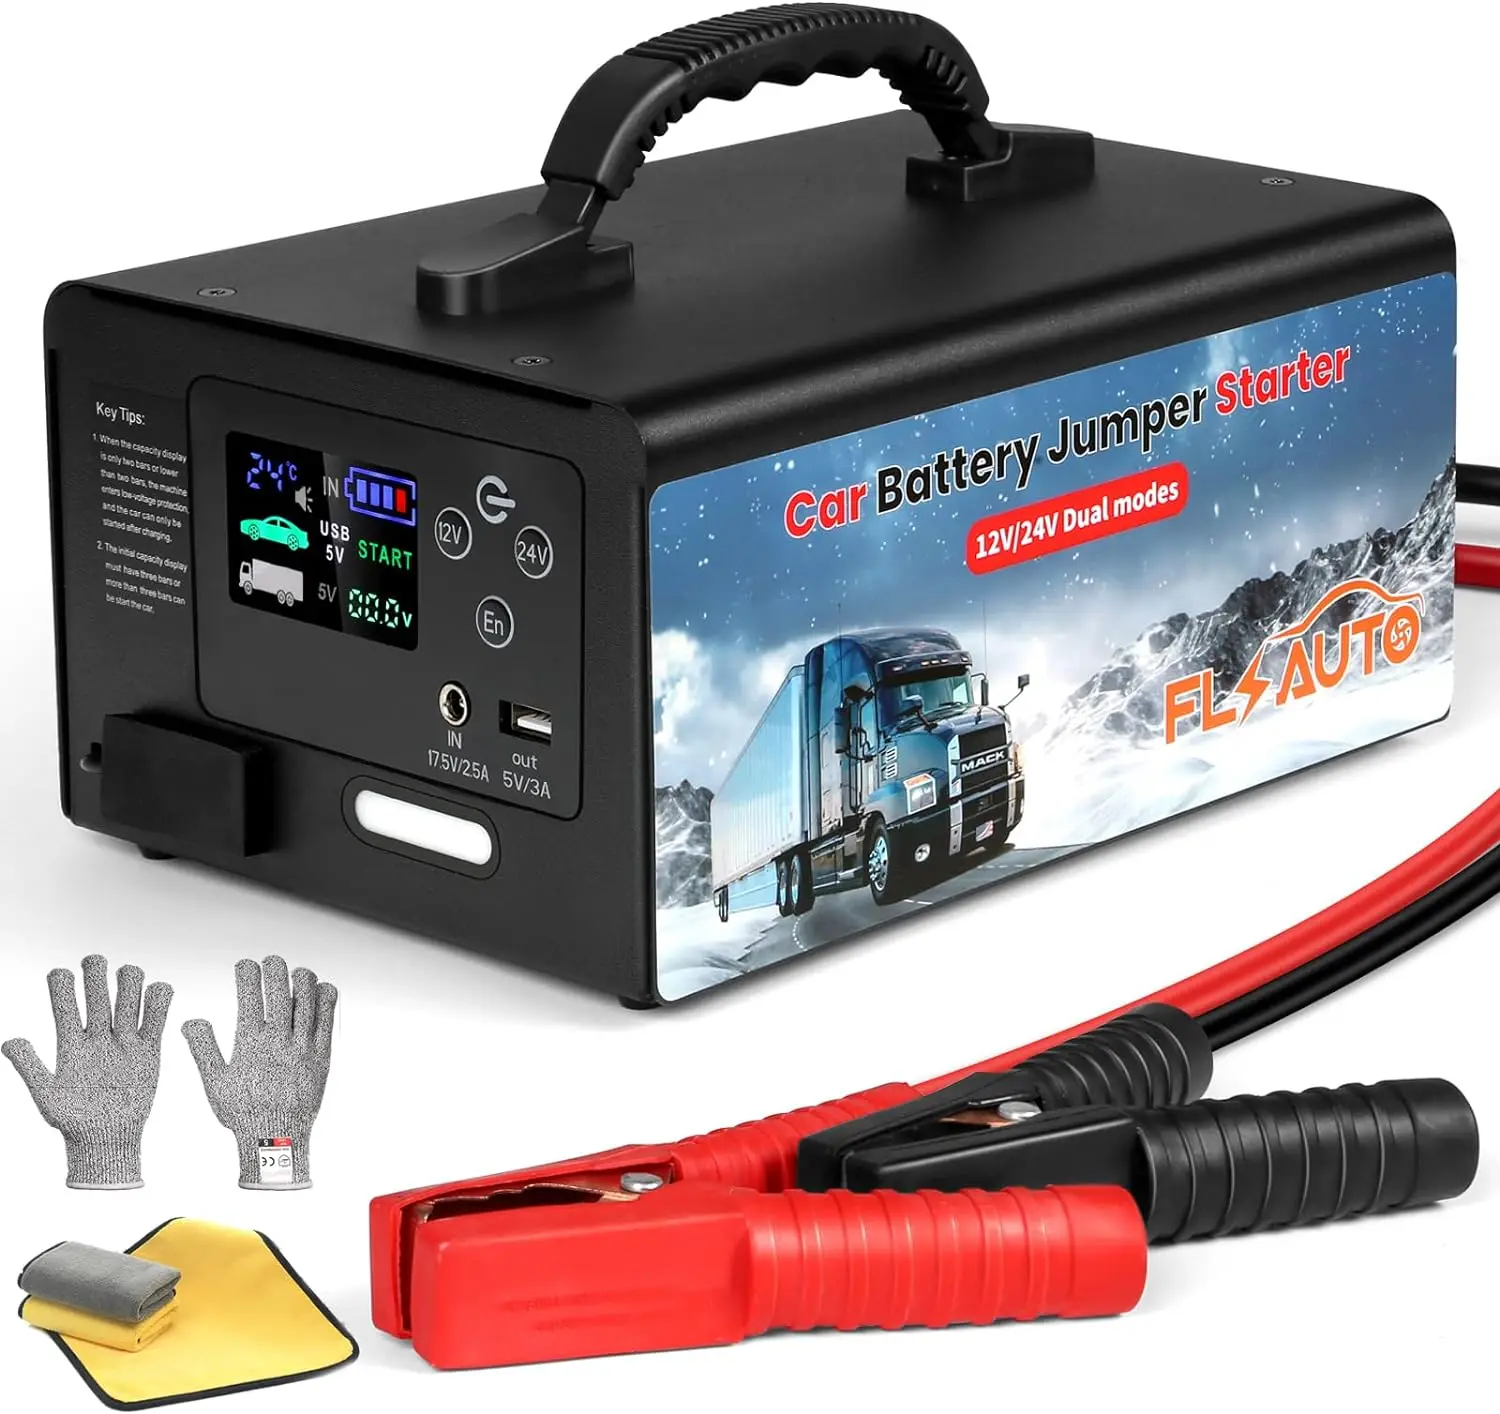 

2024 10000A Jump Starter,FlyAuto 155WH Car Battery Jump Starter for All Gas or Diesel,24V/12V Heavy Duty Lithium Jump Box USA